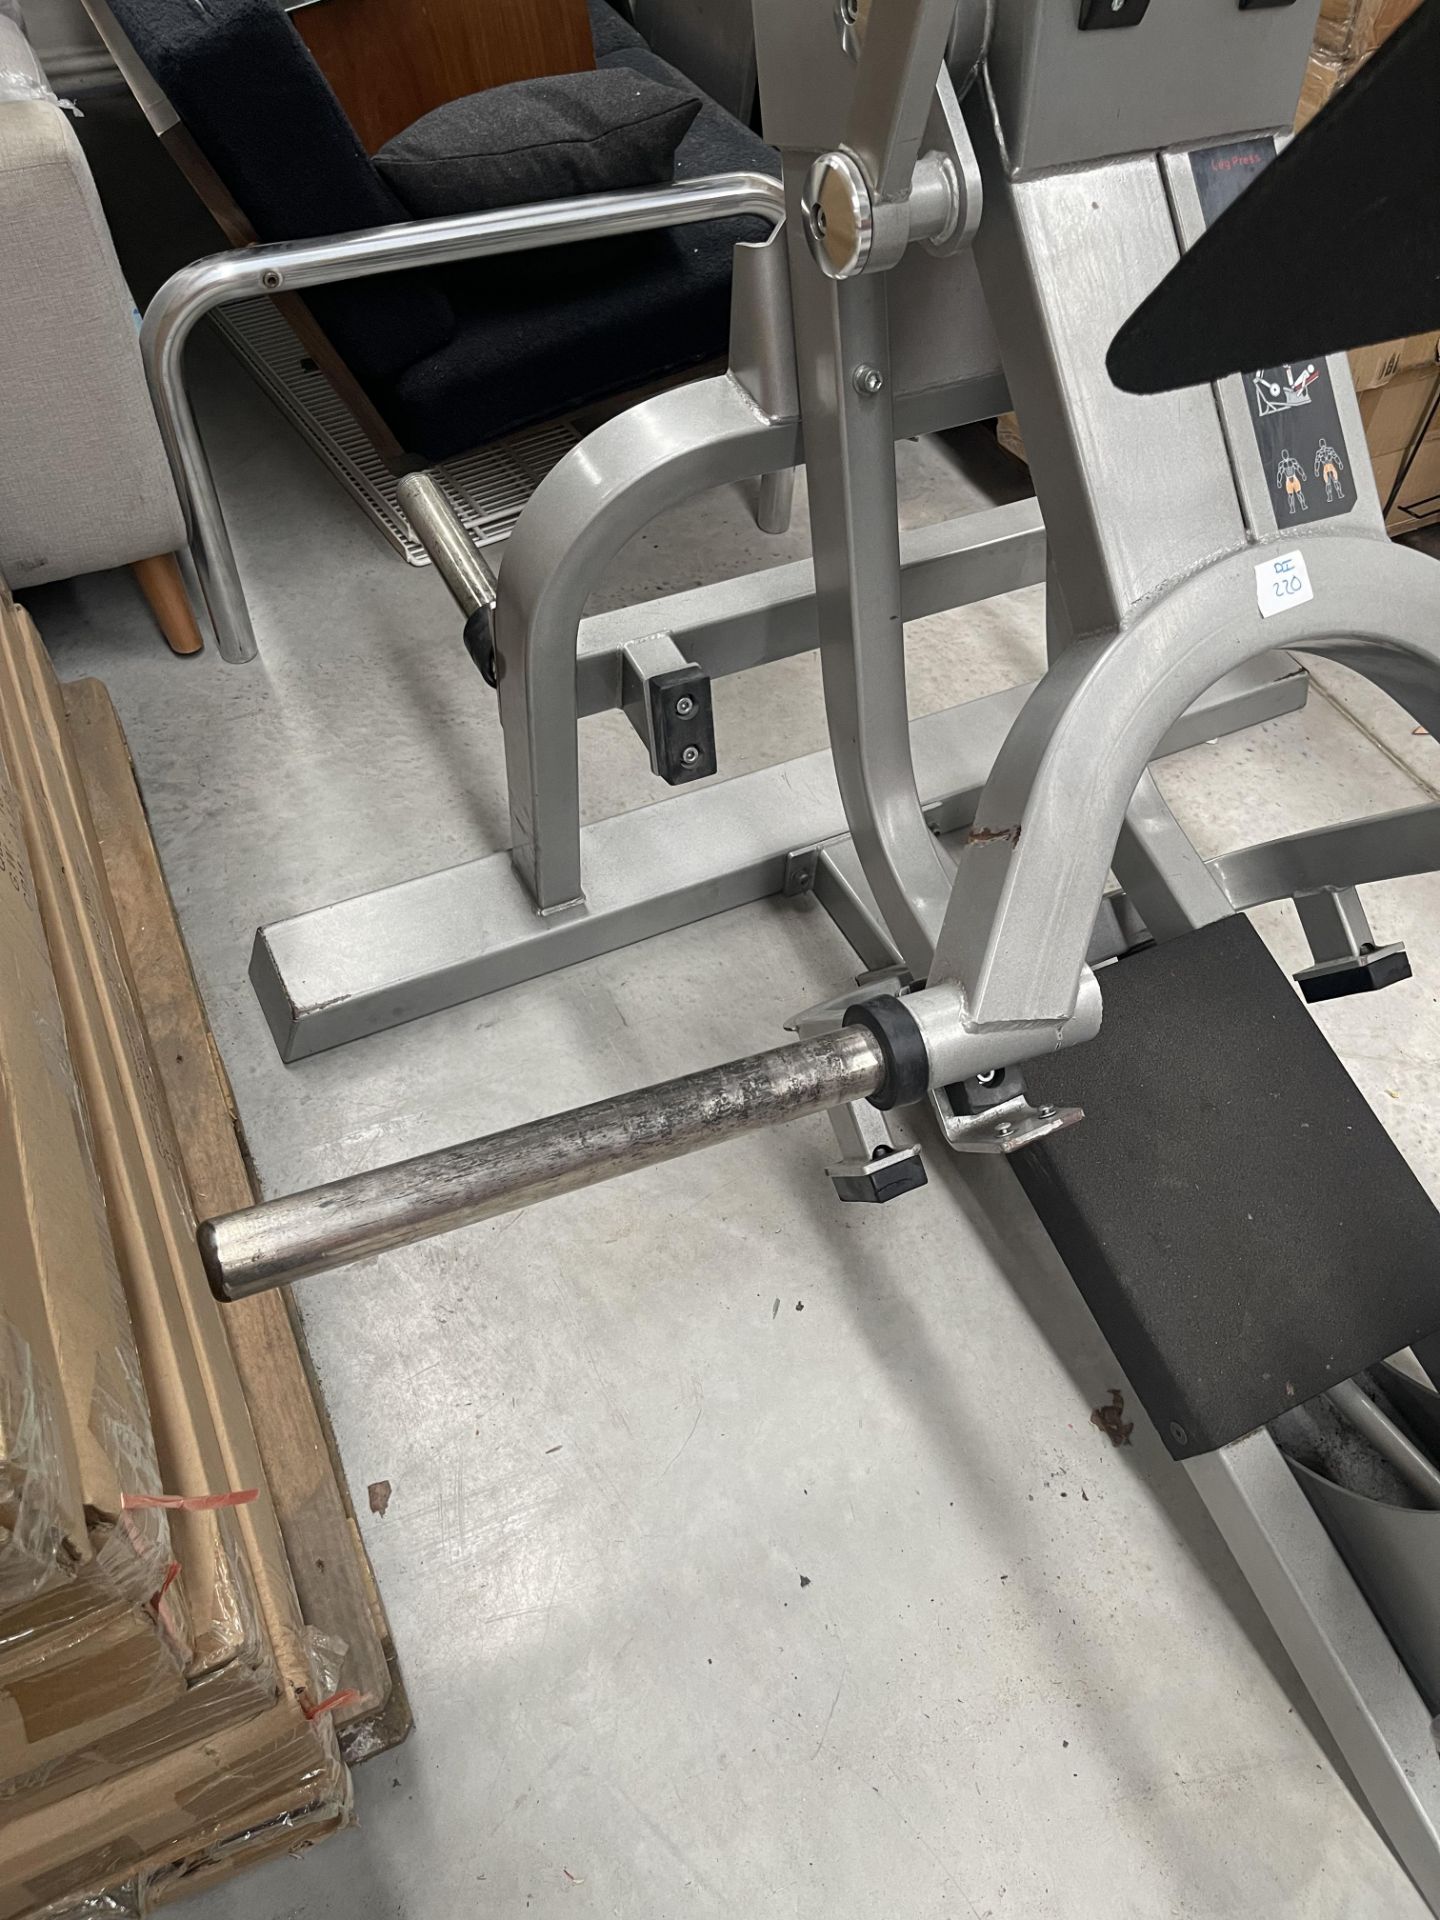 1 x Leg Press Machine - Out of Order - Image 5 of 6